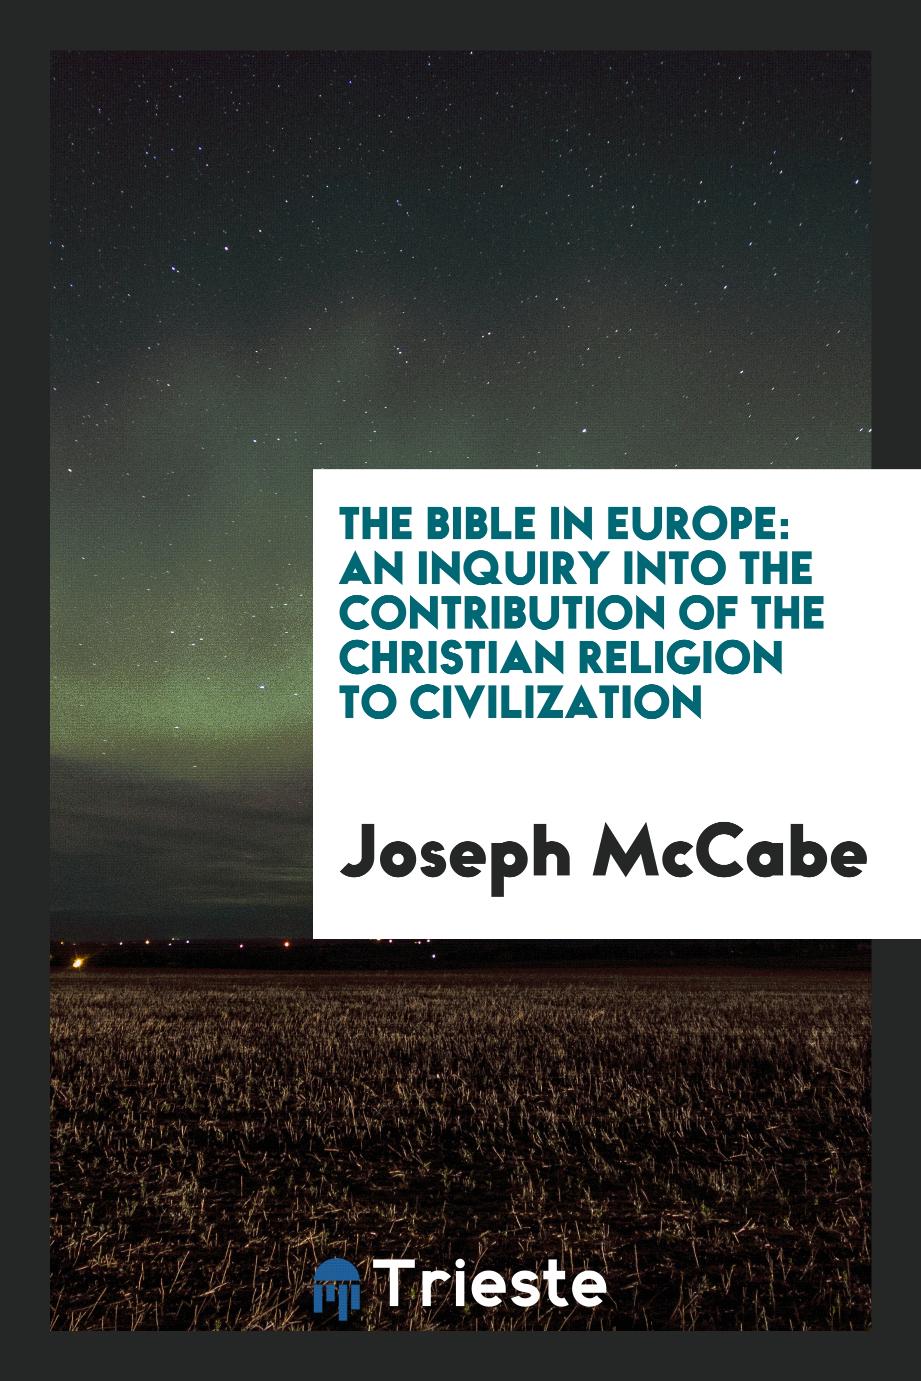 The Bible in Europe: An Inquiry into the Contribution of the Christian Religion to Civilization